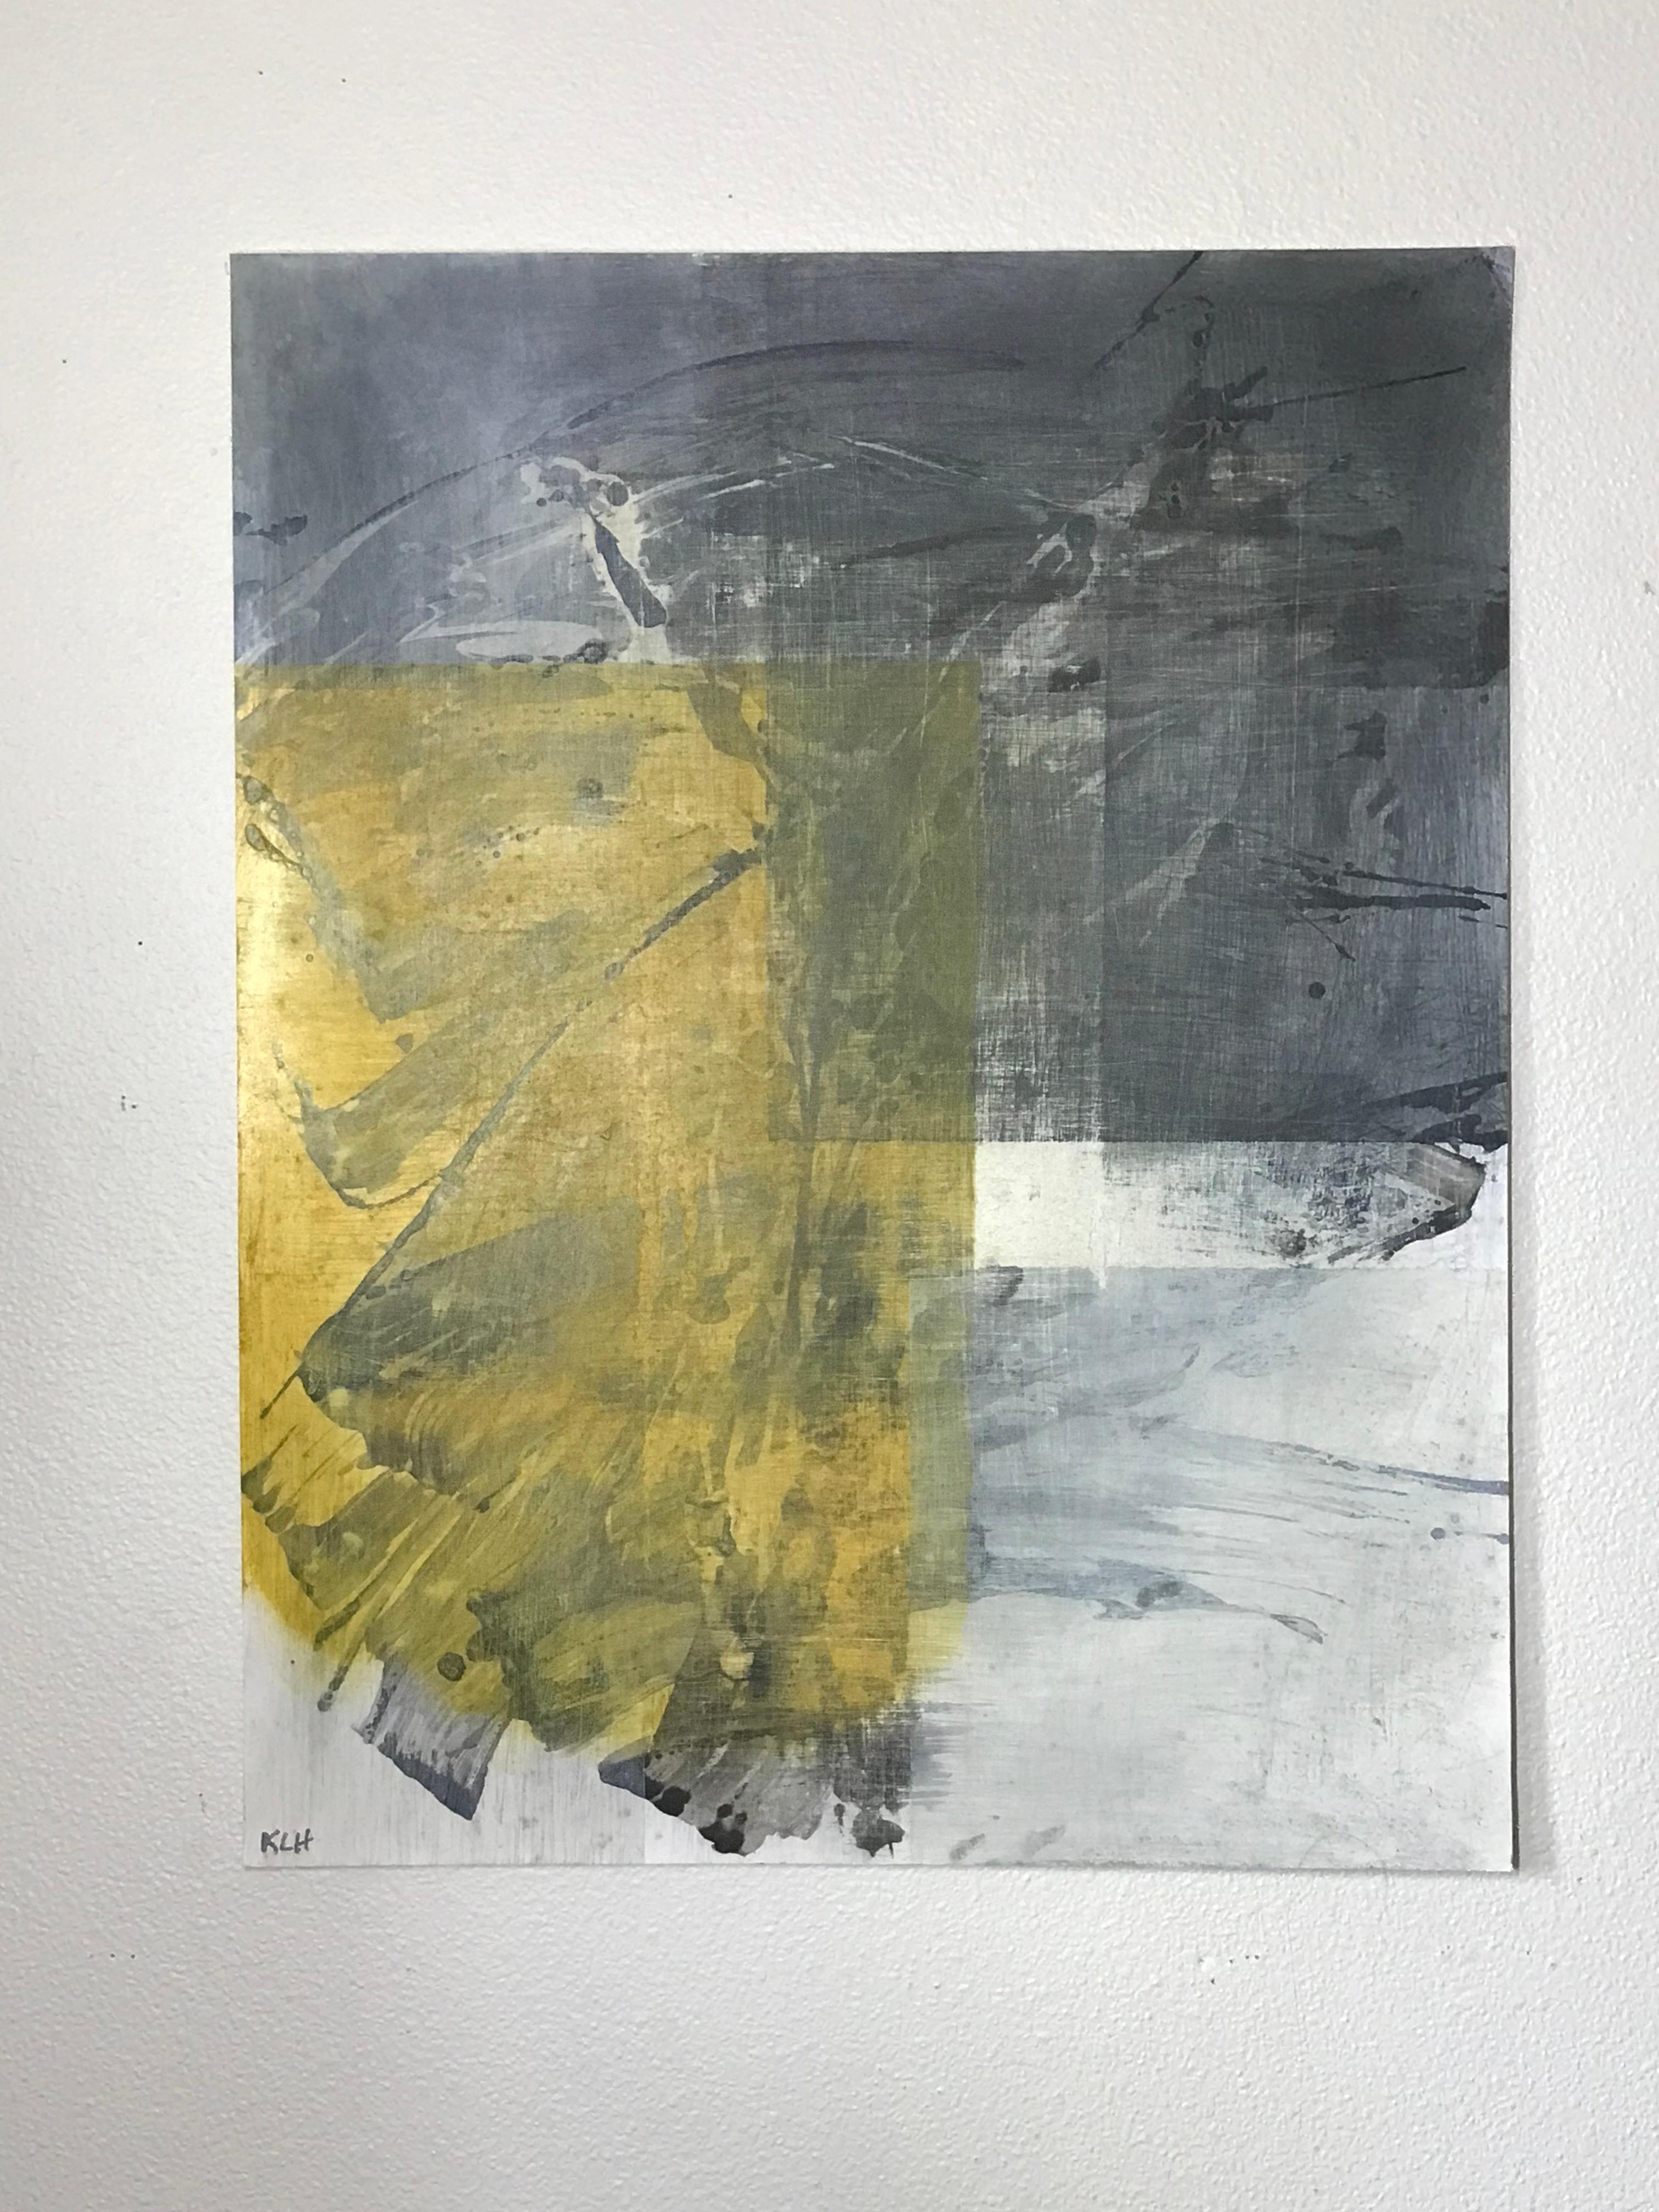 <p>Artist Comments<br>Part of artist Kris Haas' derivative and ongoing Disjointed Reality series. A translucent block of yellow falls in place onto the left overlapping layers of gray. Swift splashes of black appear in quick strokes among them. A